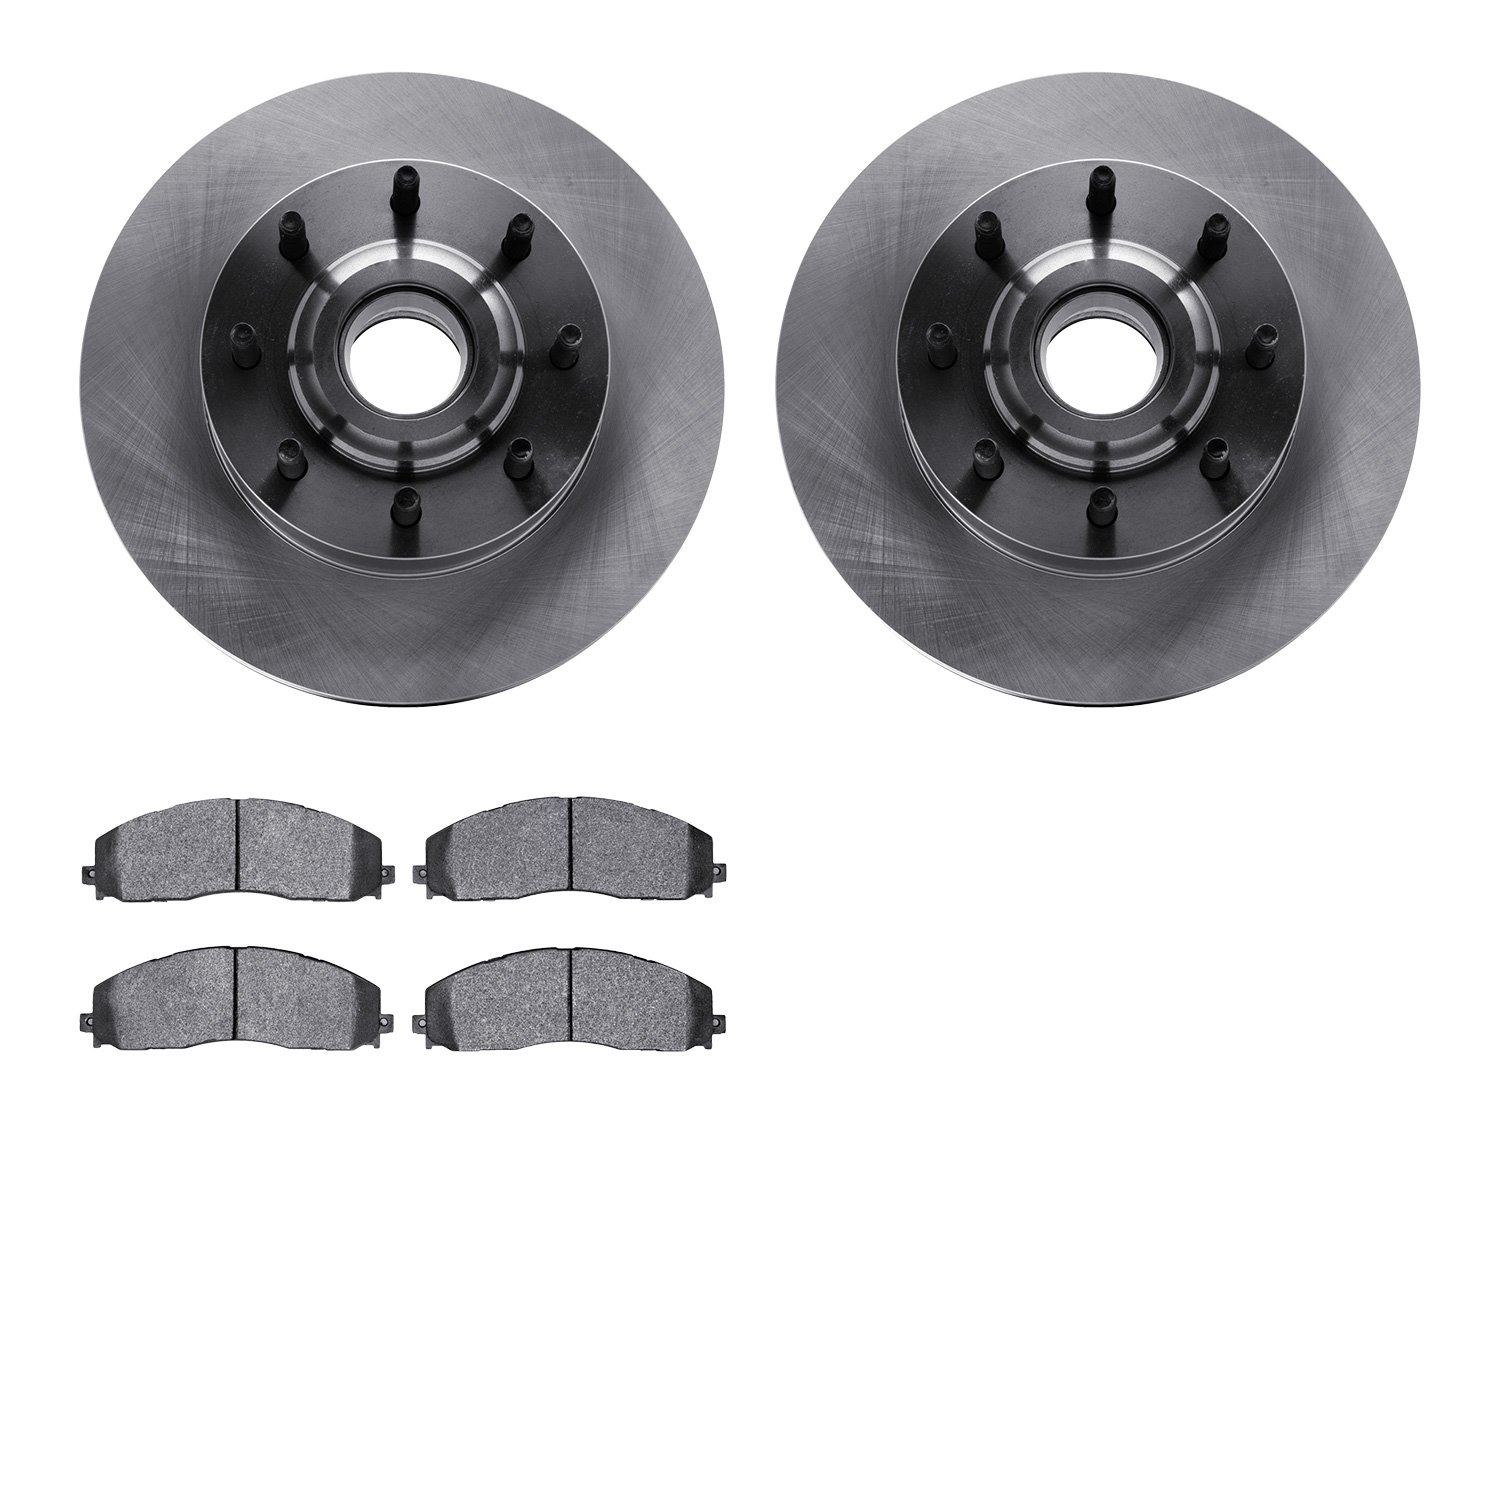 6502-99678 Brake Rotors w/5000 Advanced Brake Pads Kit, Fits Select Ford/Lincoln/Mercury/Mazda, Position: Front